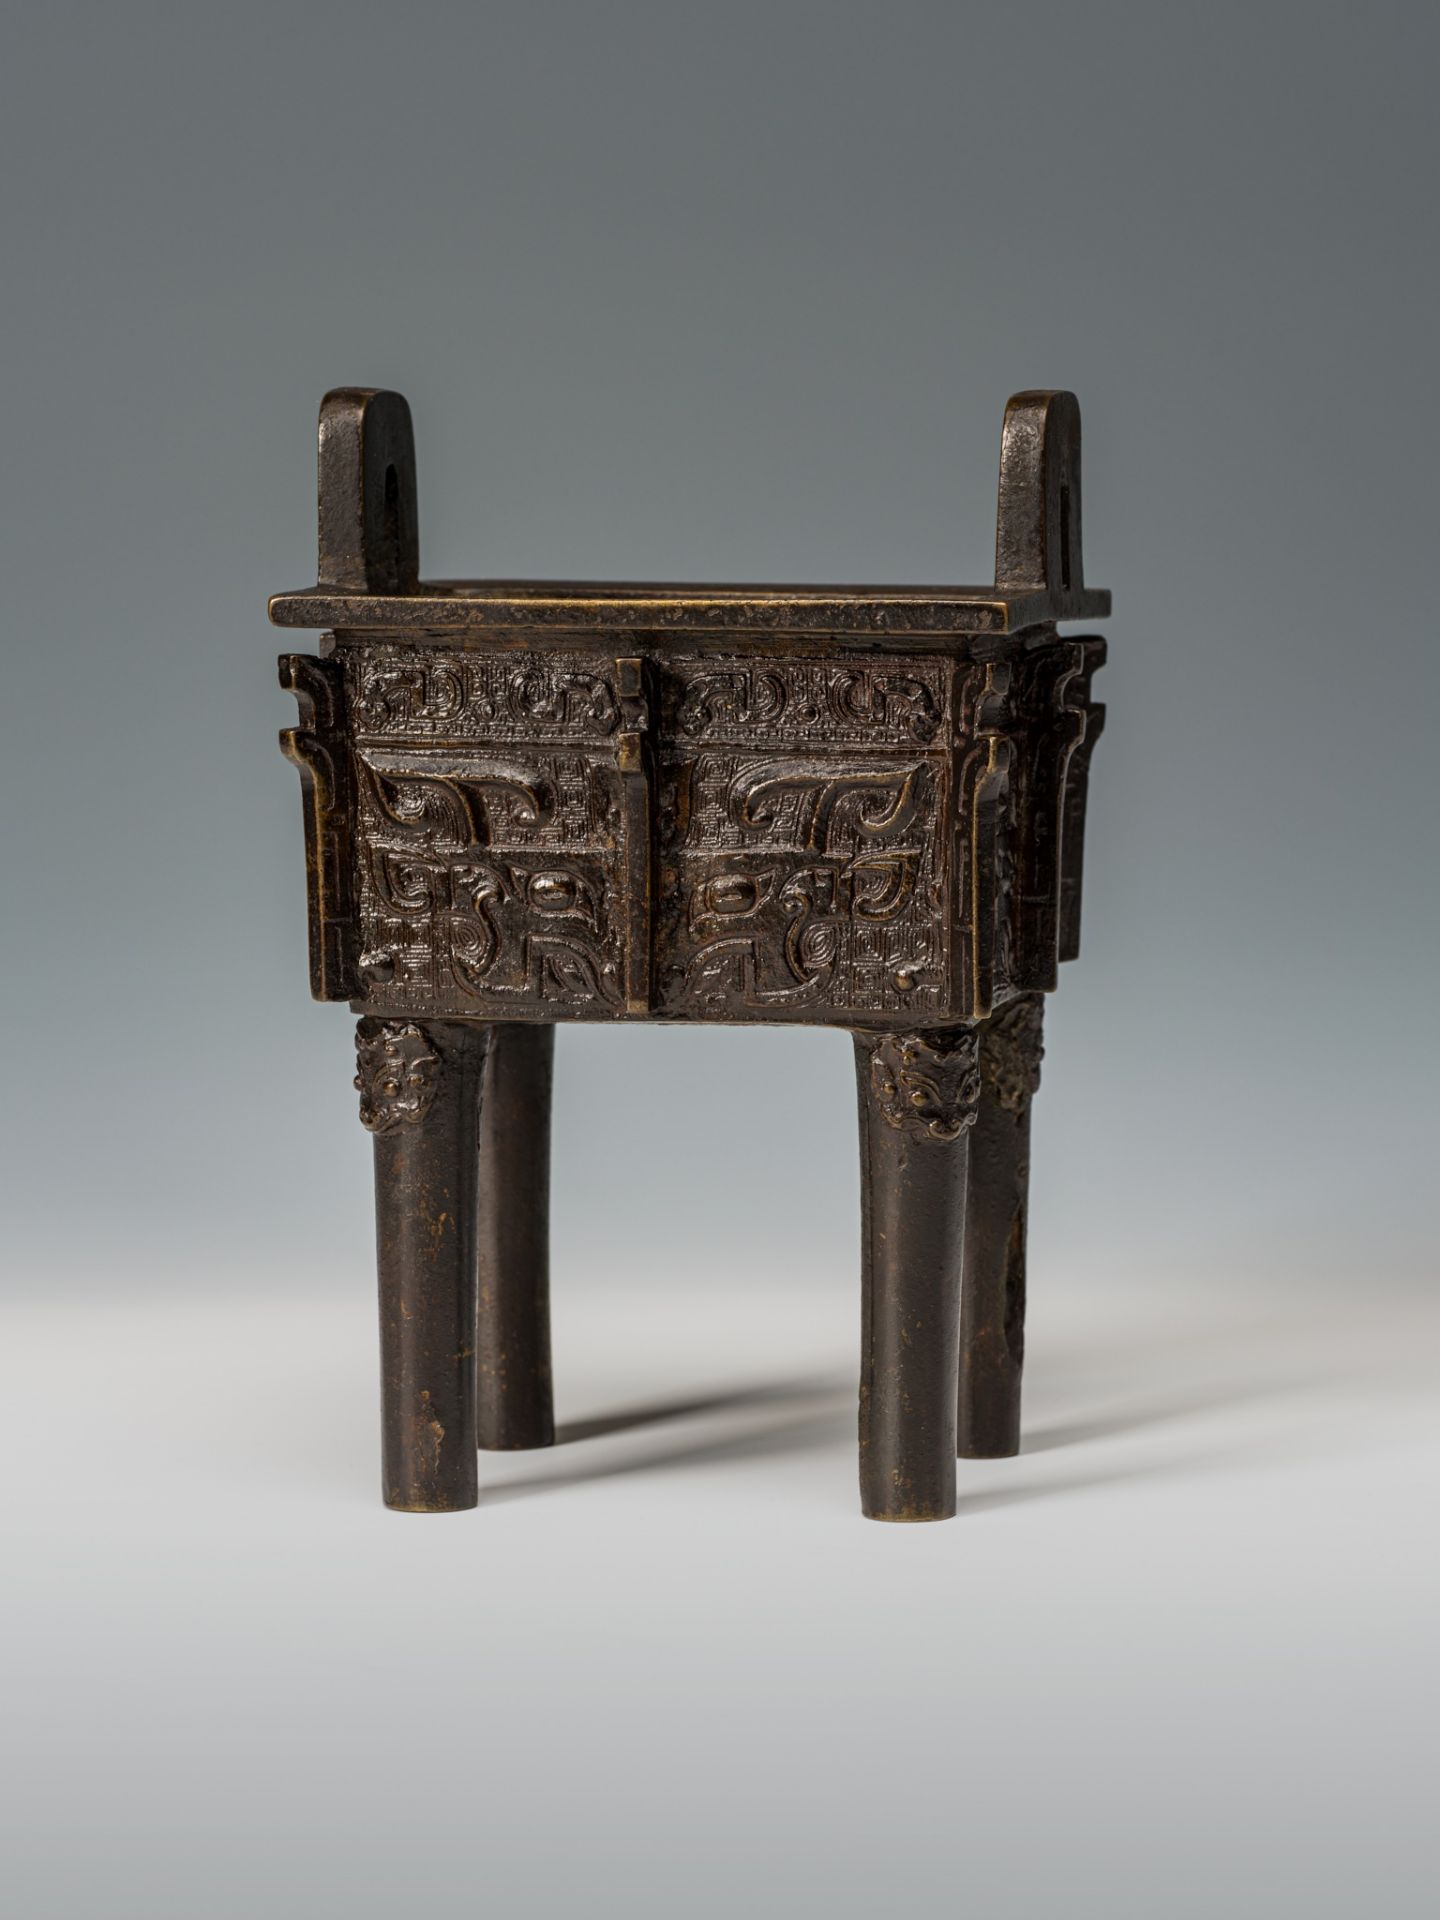 AN ARCHAISTIC BRONZE VESSEL, FANGDING, CHINA, 17TH CENTURY - Image 6 of 13